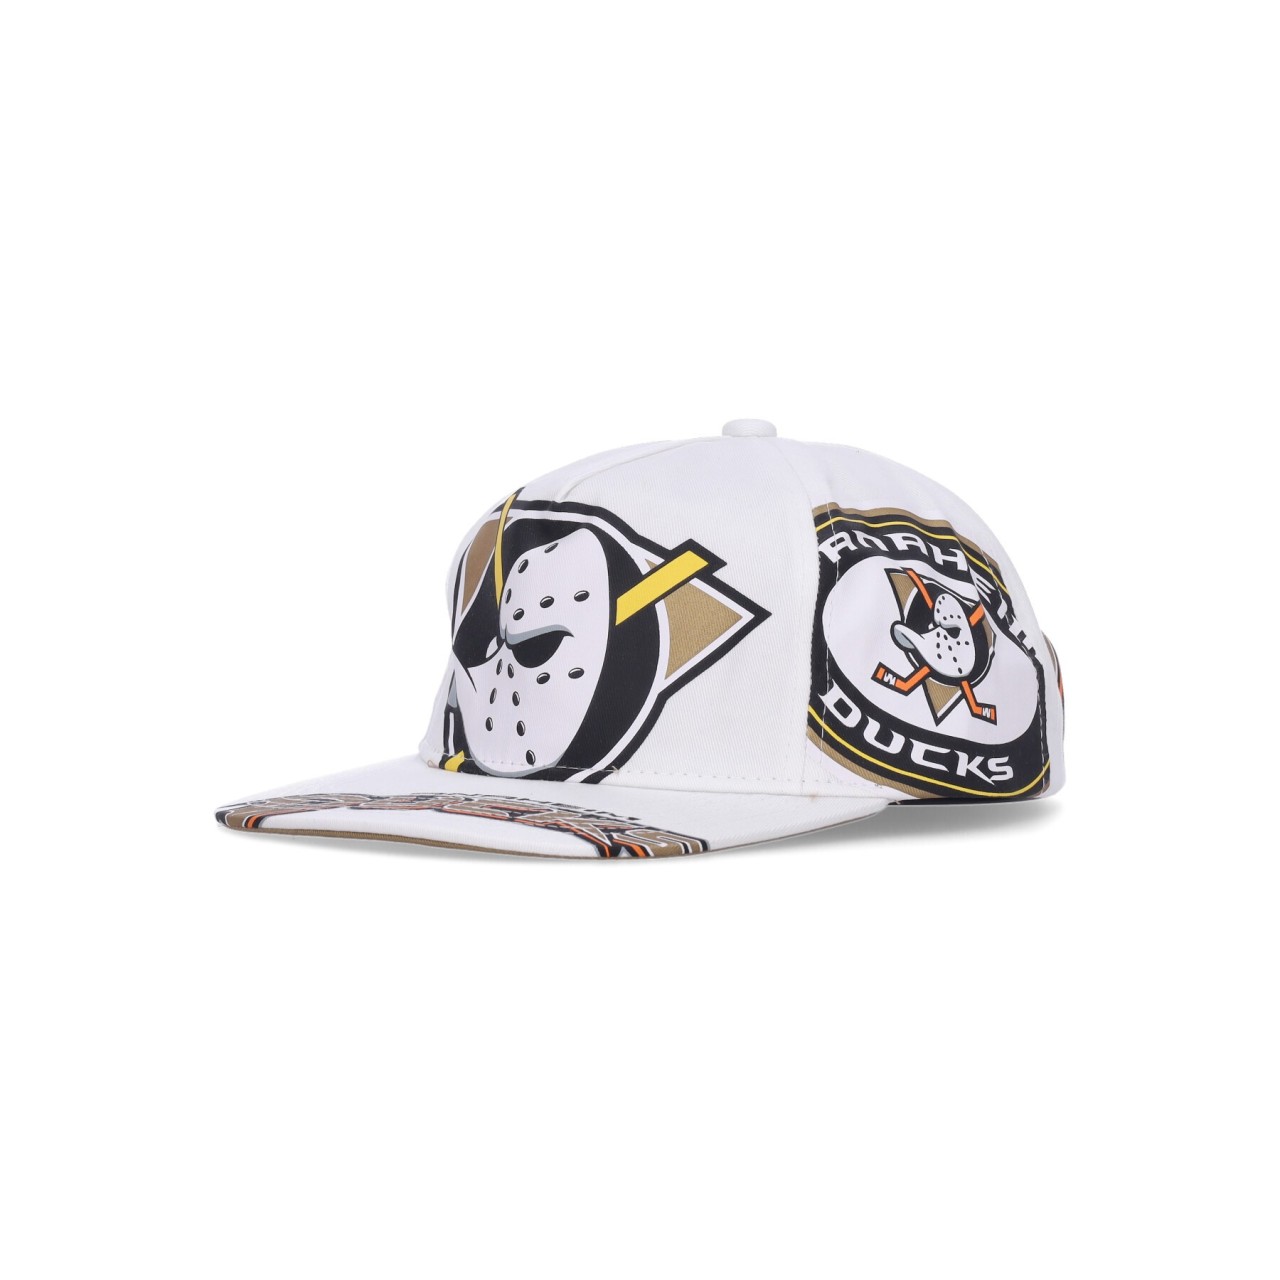 MITCHELL & NESS NHL IN YOUR FACE DEADSTOCK ANADUC HMUS5632-ADUYYPPPWHIT